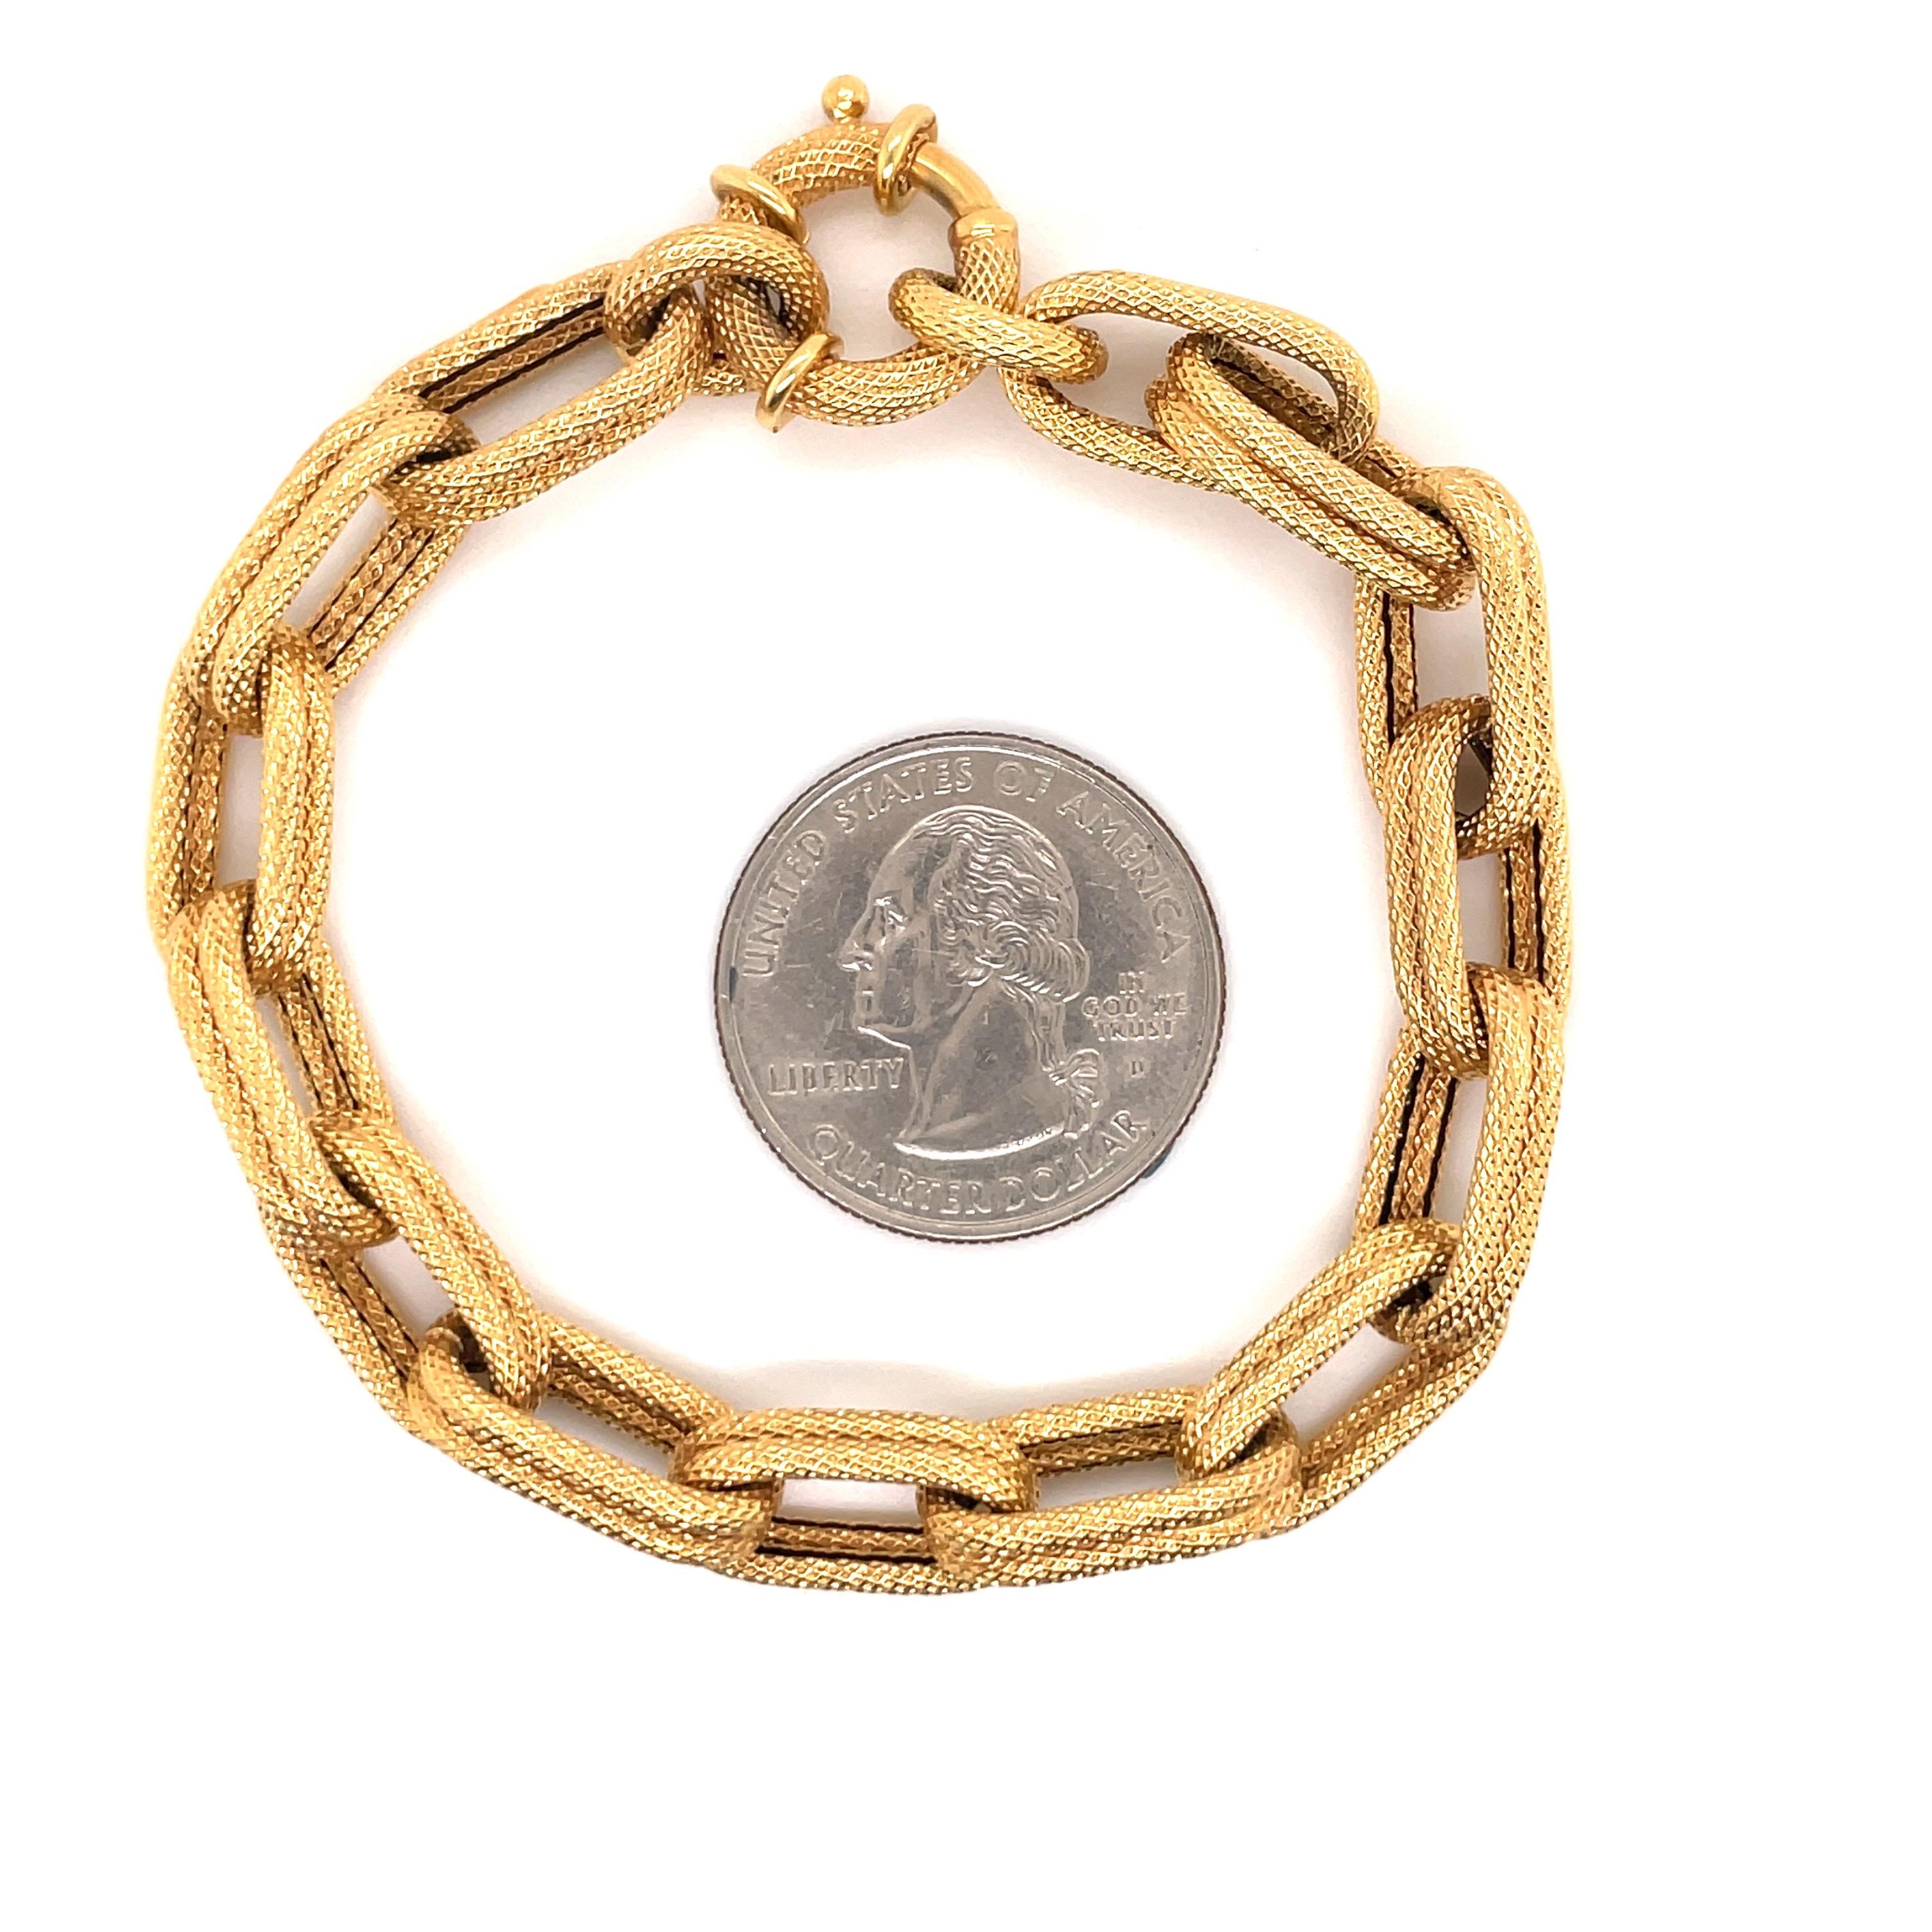 14 Karat Yellow gold link bracelet featuring 14 oval mesh links weighing 11.2 grams. 
Great for stacking!
More Link Bracelets Available.